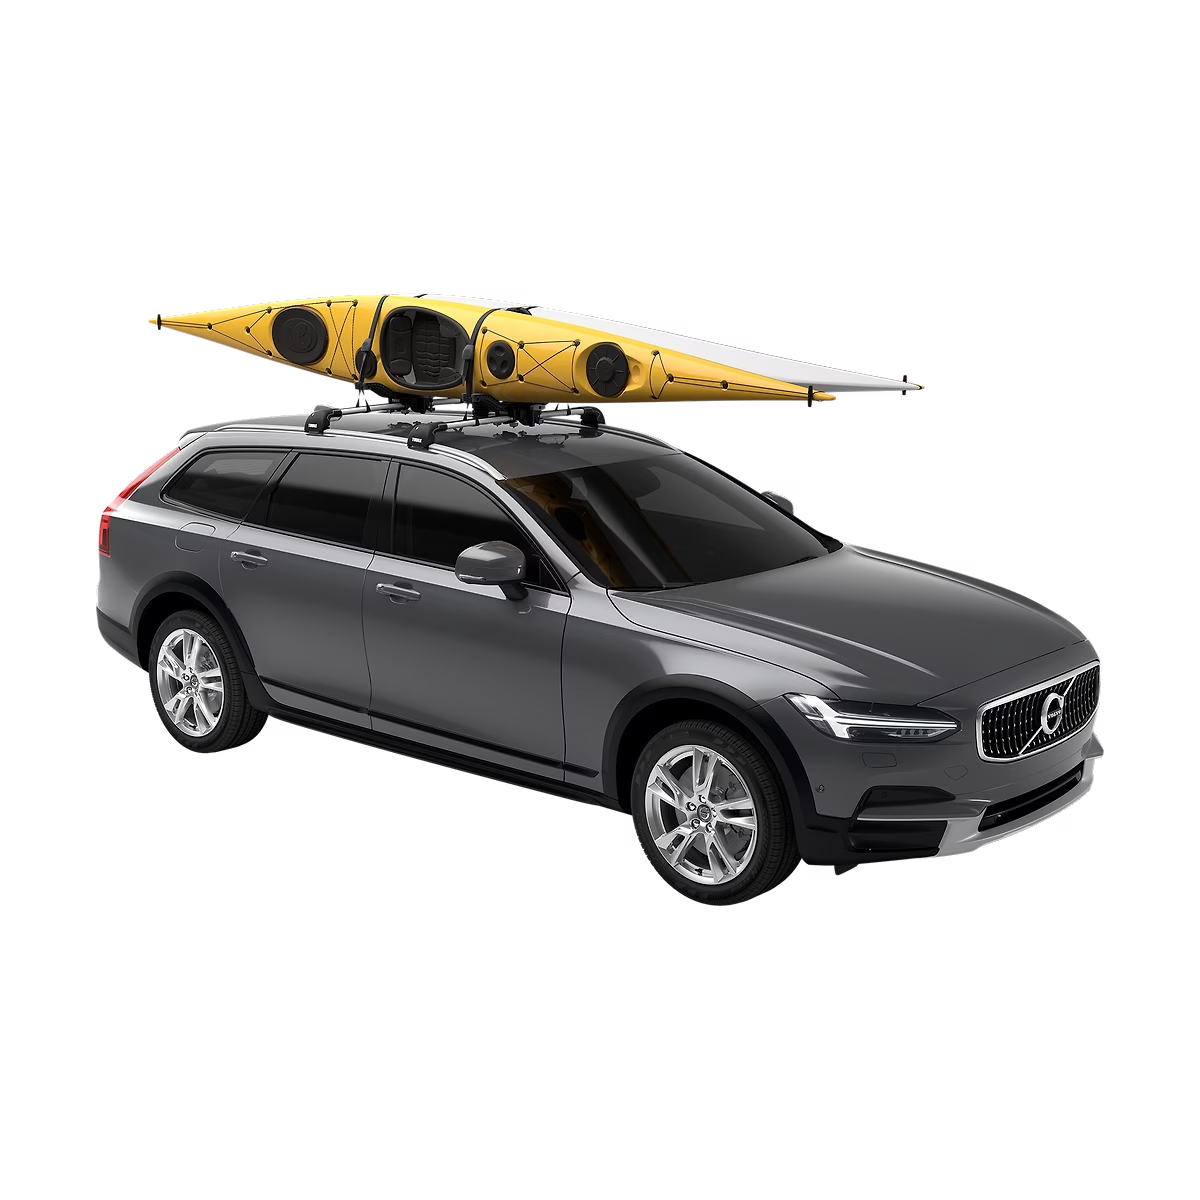 Roof Rack Accessory | Kayak & Board Carrier (Thule Compass - 890000)